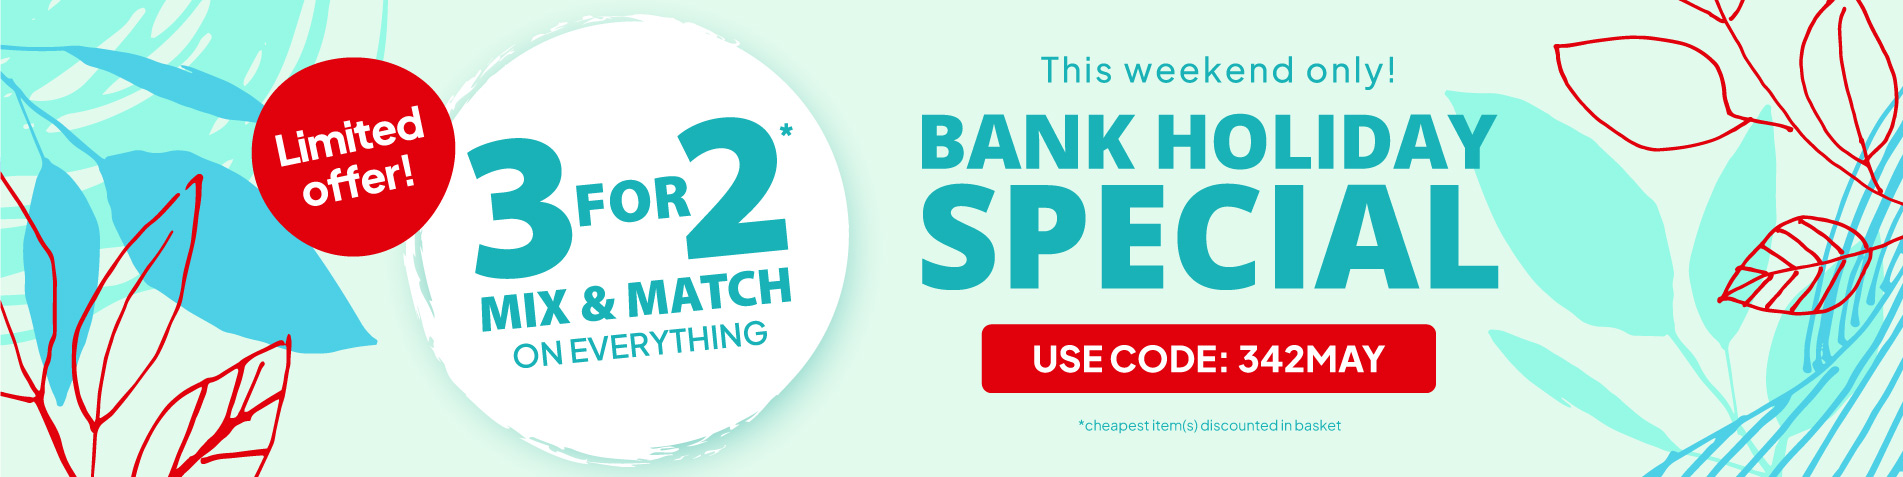 This Weekend only! BANK HOLIDAY SPECIAL - 3 for 2 Mix & Match on everything - Use code: 342MAY